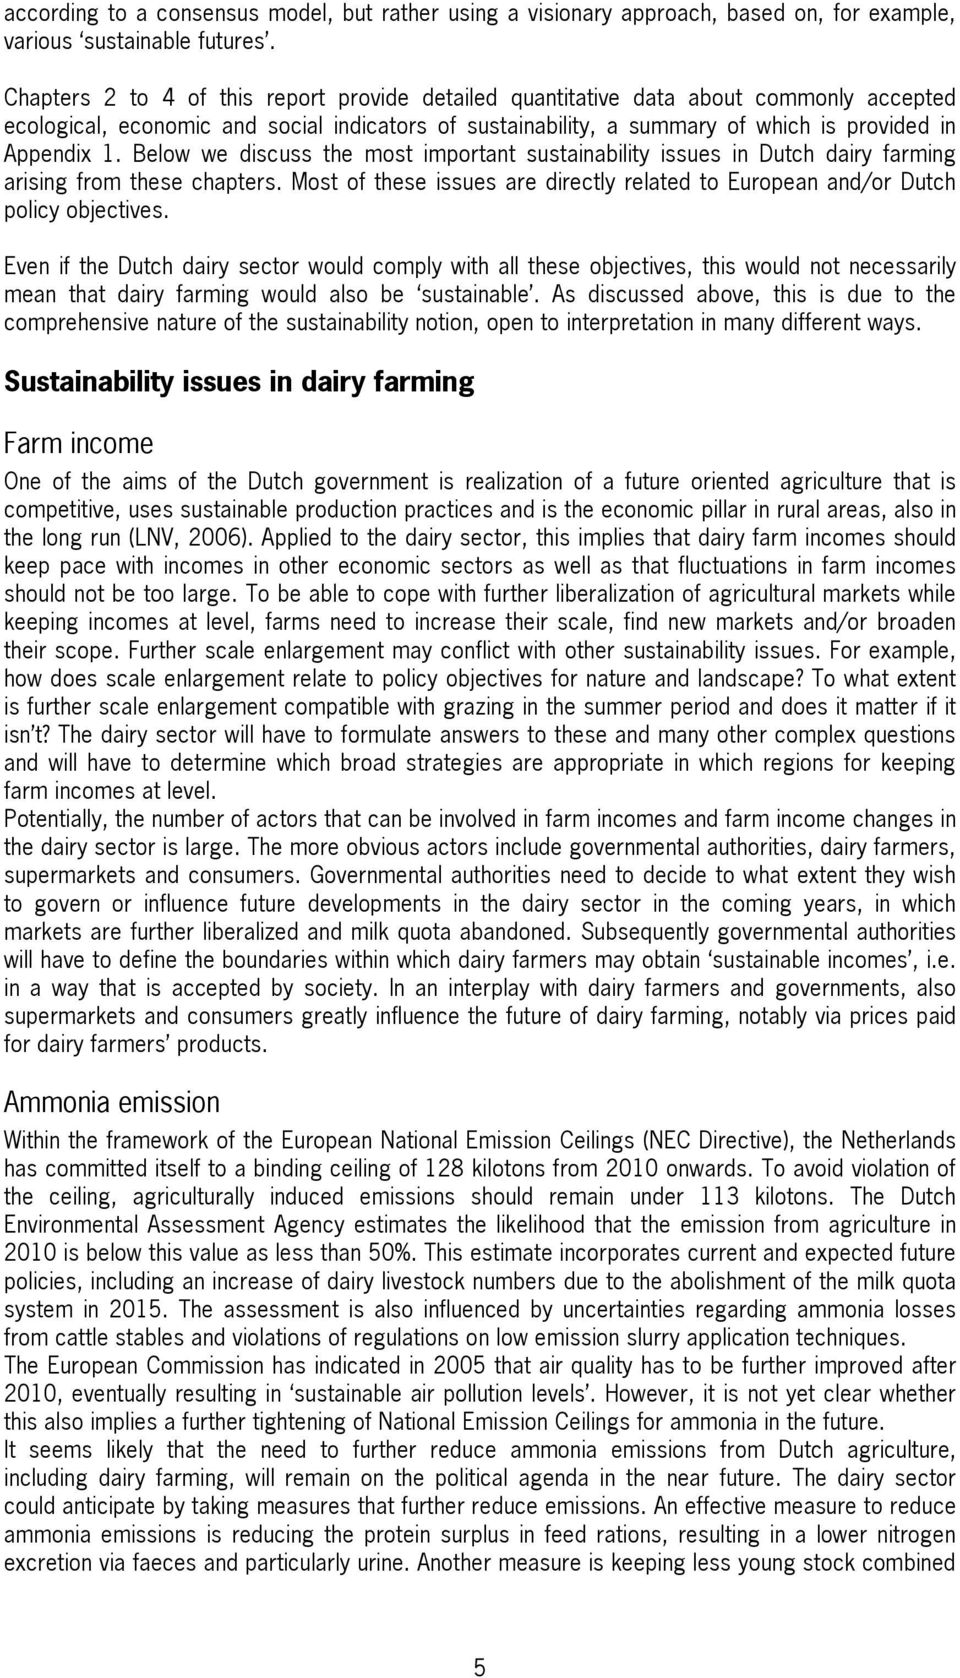 Below we discuss the most important sustainability issues in Dutch dairy farming arising from these chapters. Most of these issues are directly related to European and/or Dutch policy objectives.